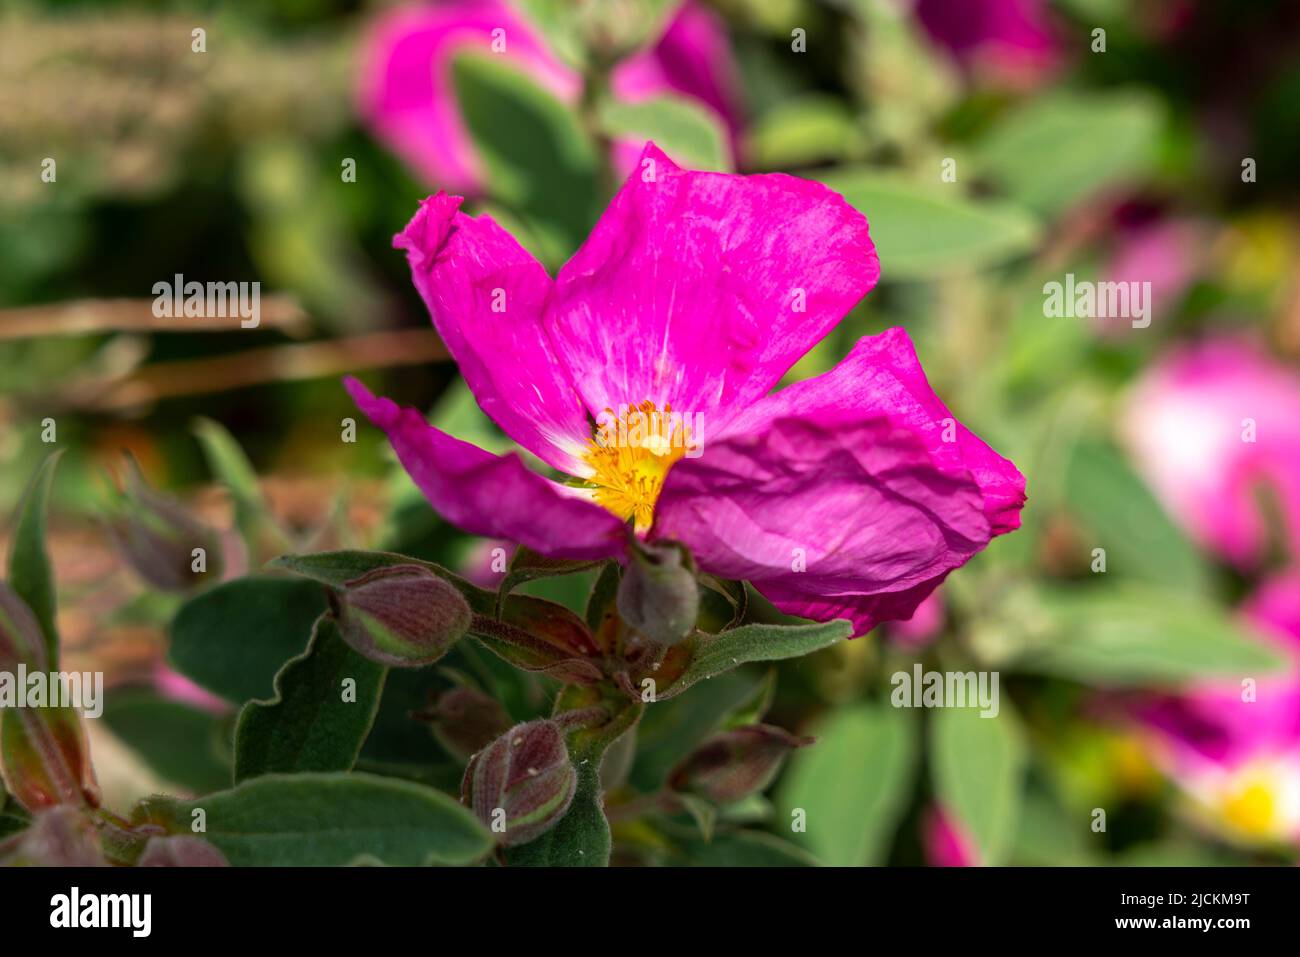 Cistus 'Blushing Peggy Sammons' a summer flowering shrub plant with a magenta pink summertime flower commonly known as rock rose, stock photo image Stock Photo